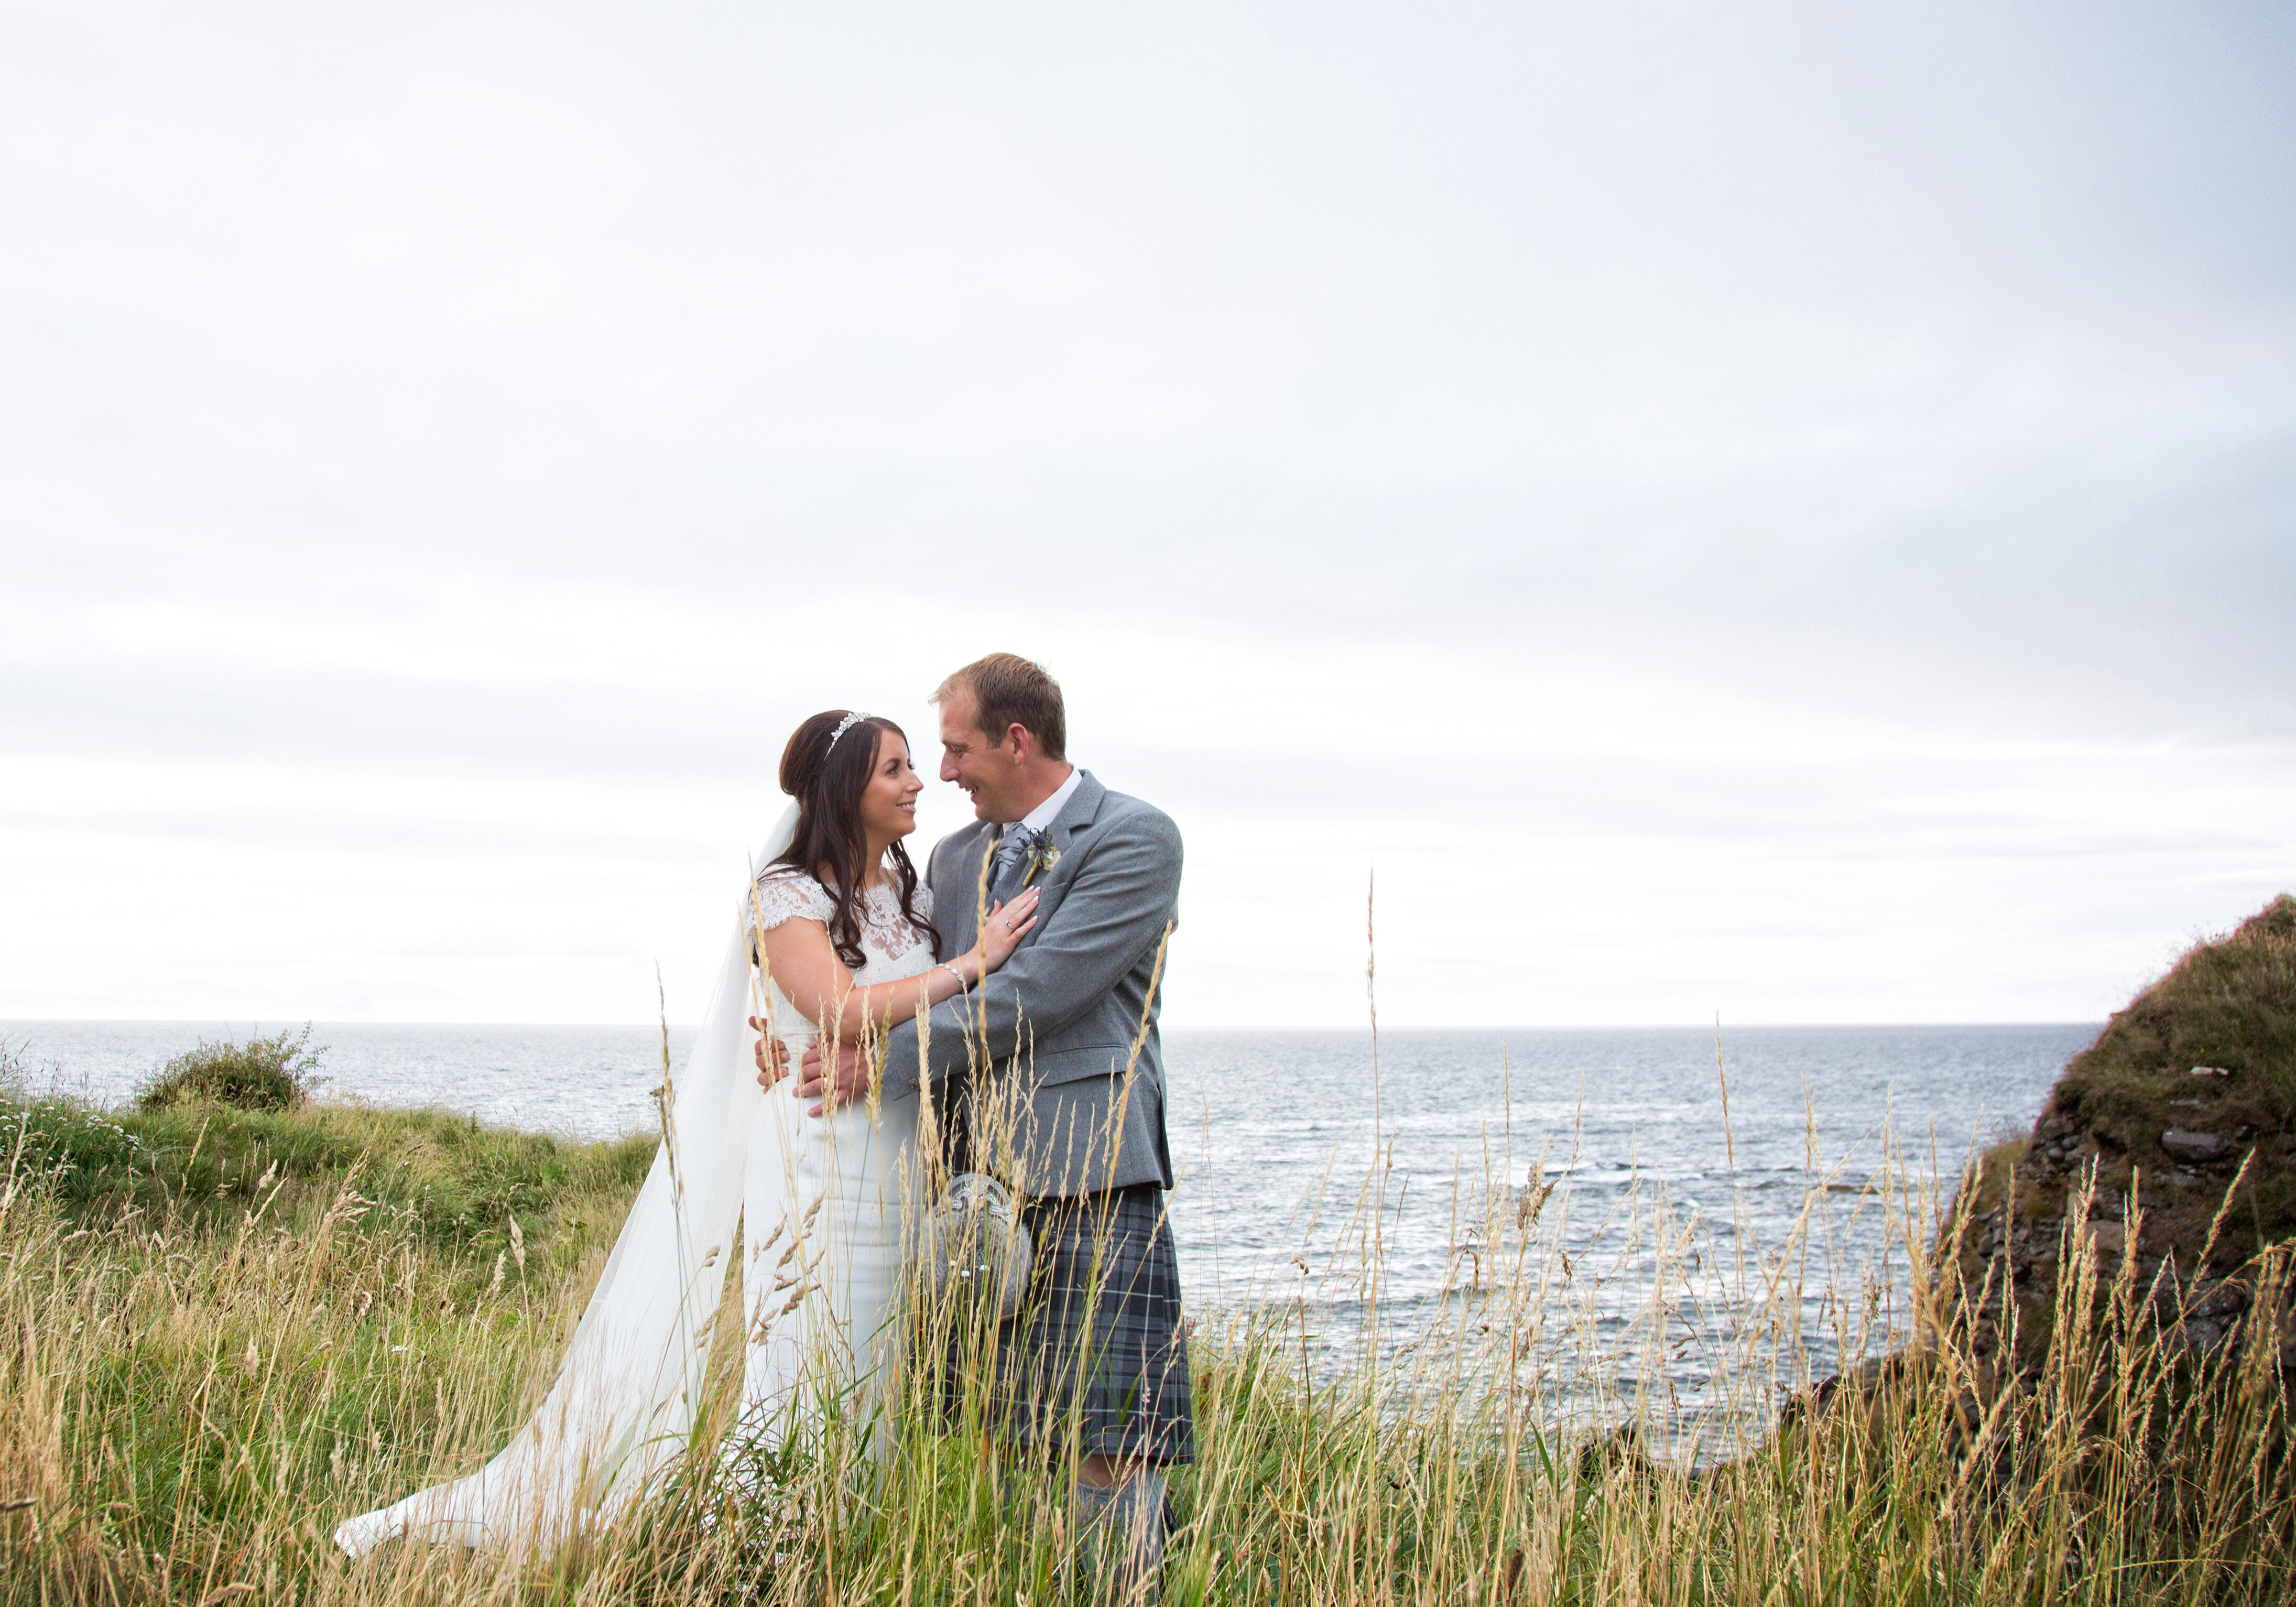 A delighted couple celebrate their marriage in the ground of Trump Turnberry